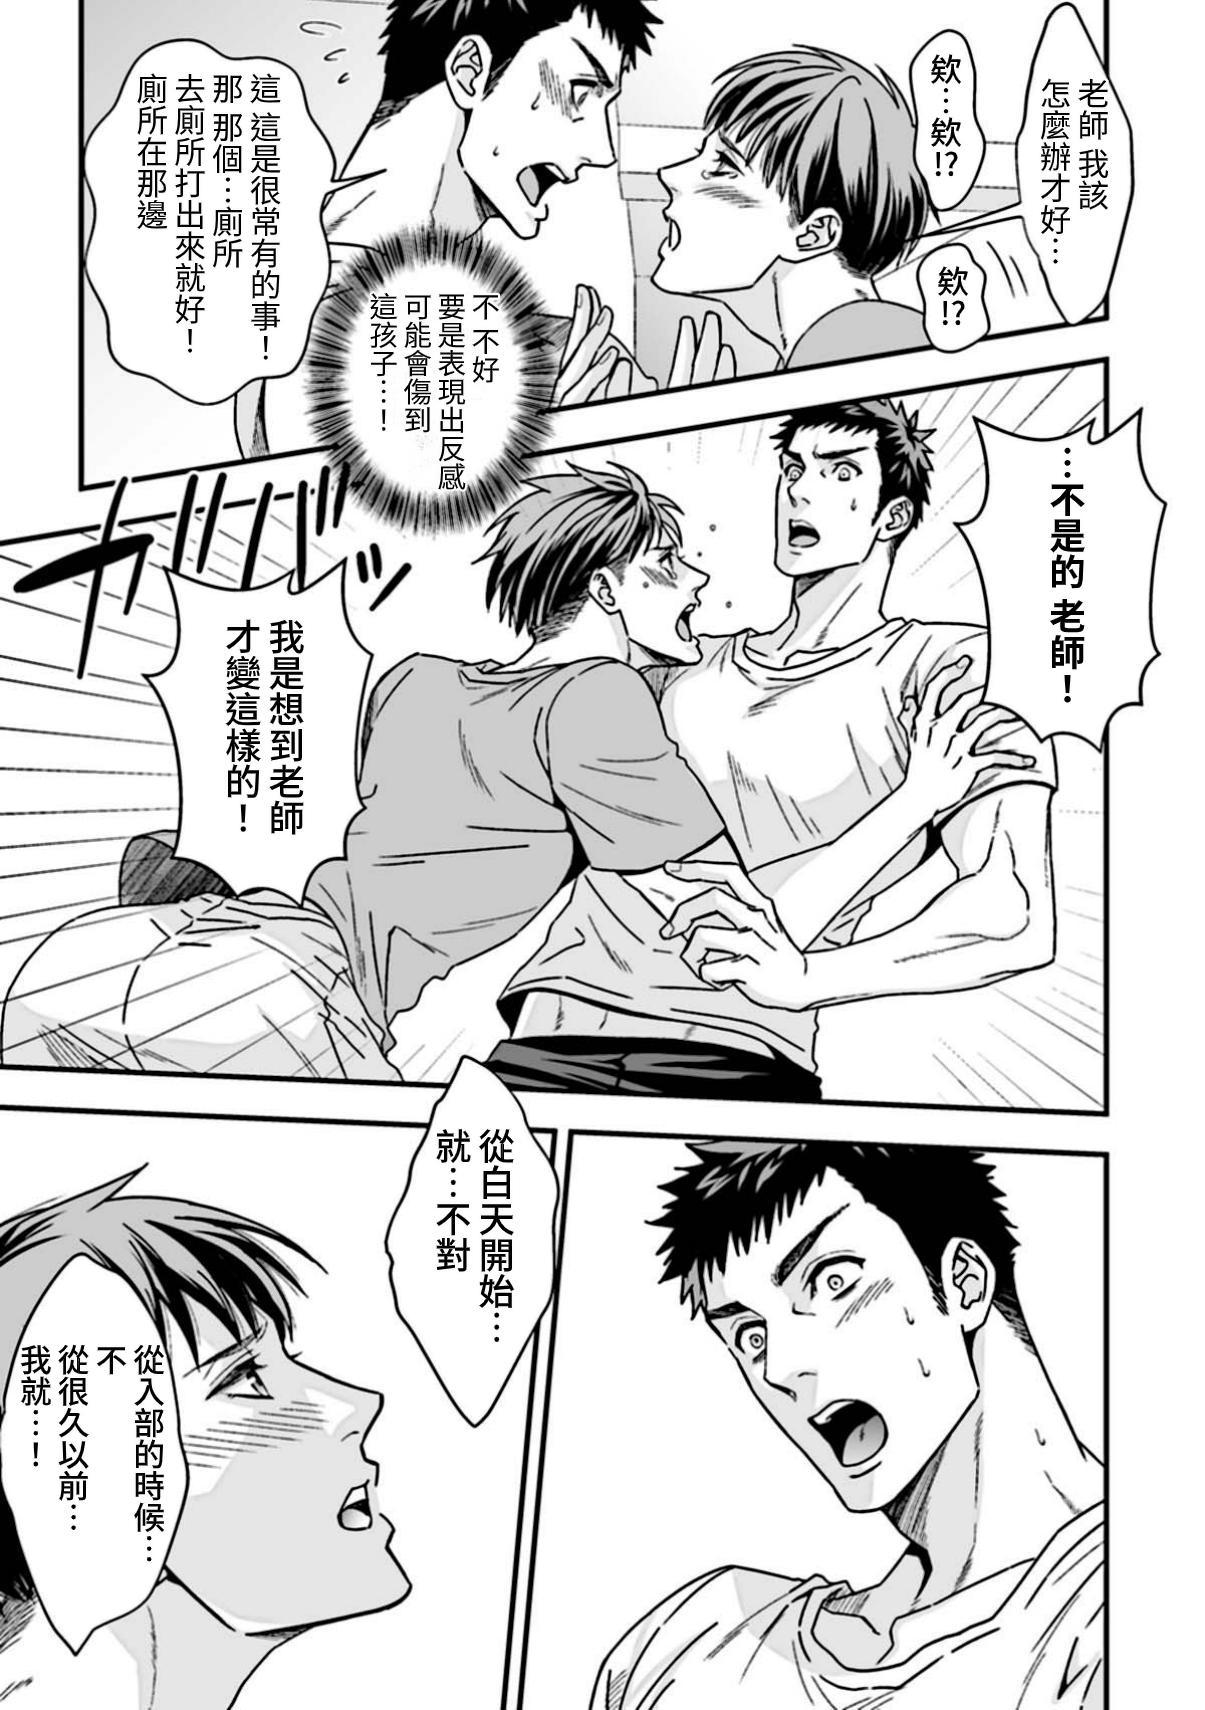 Cheerleader 體育教師2 Moaning - Page 7